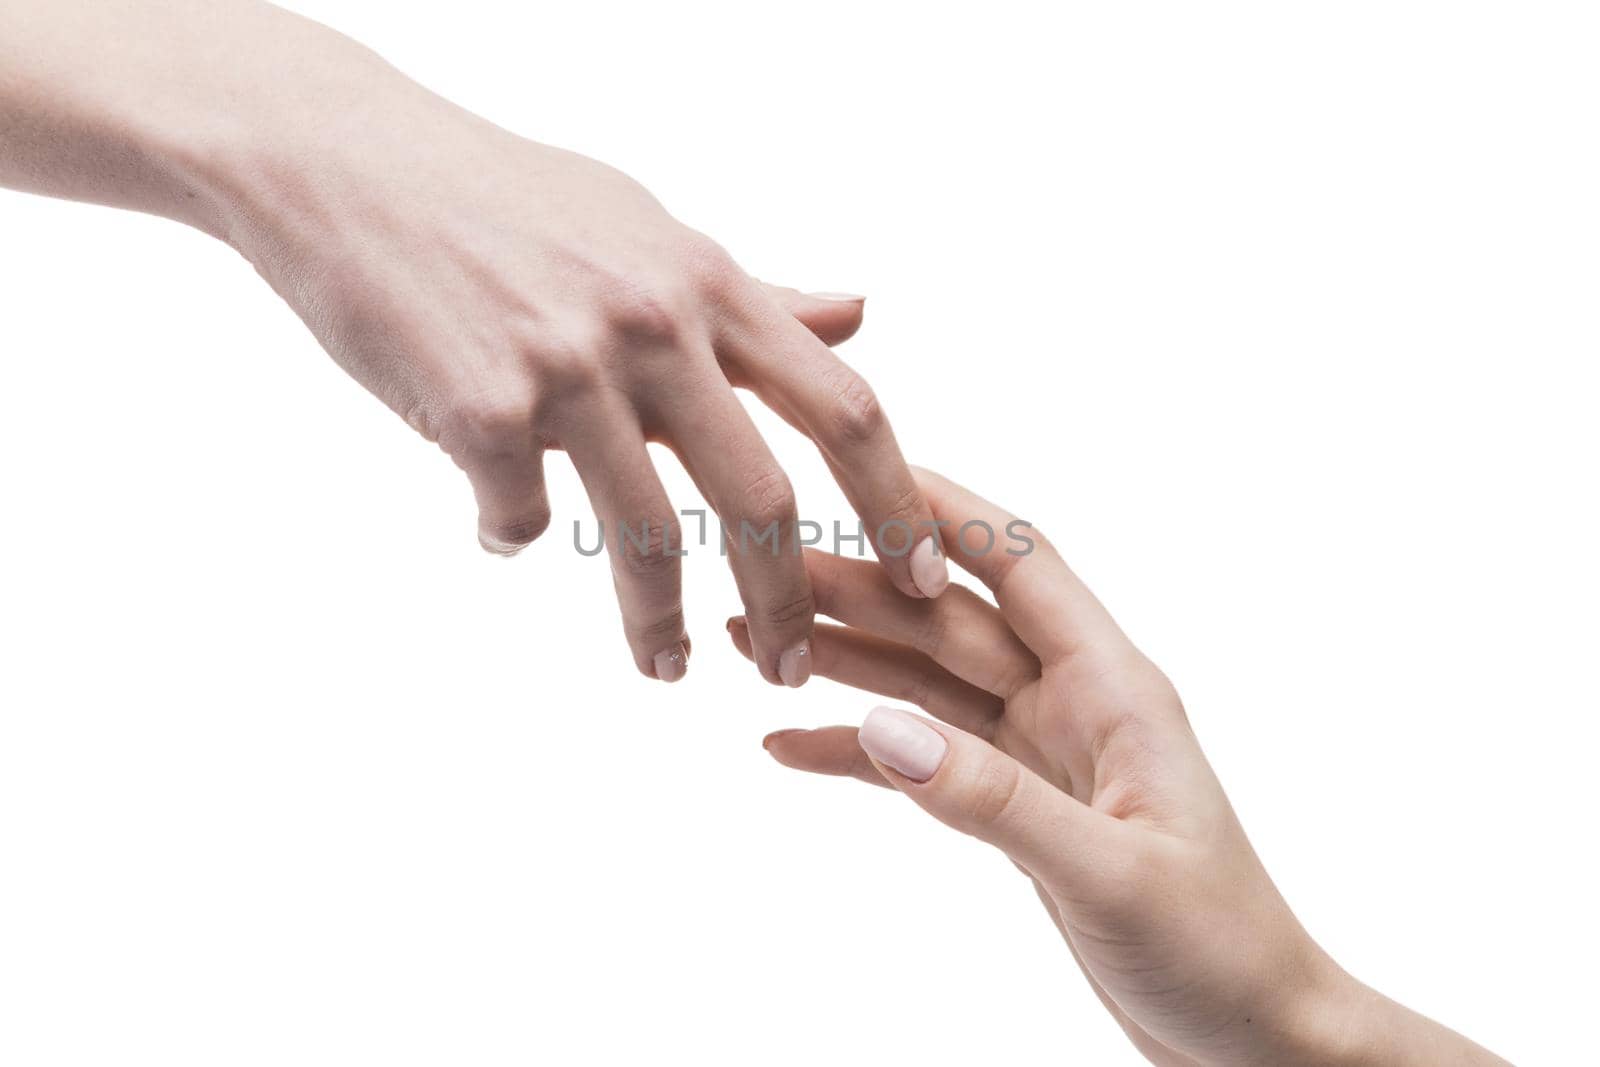 hands gently touching each other. High quality beautiful photo concept by Zahard